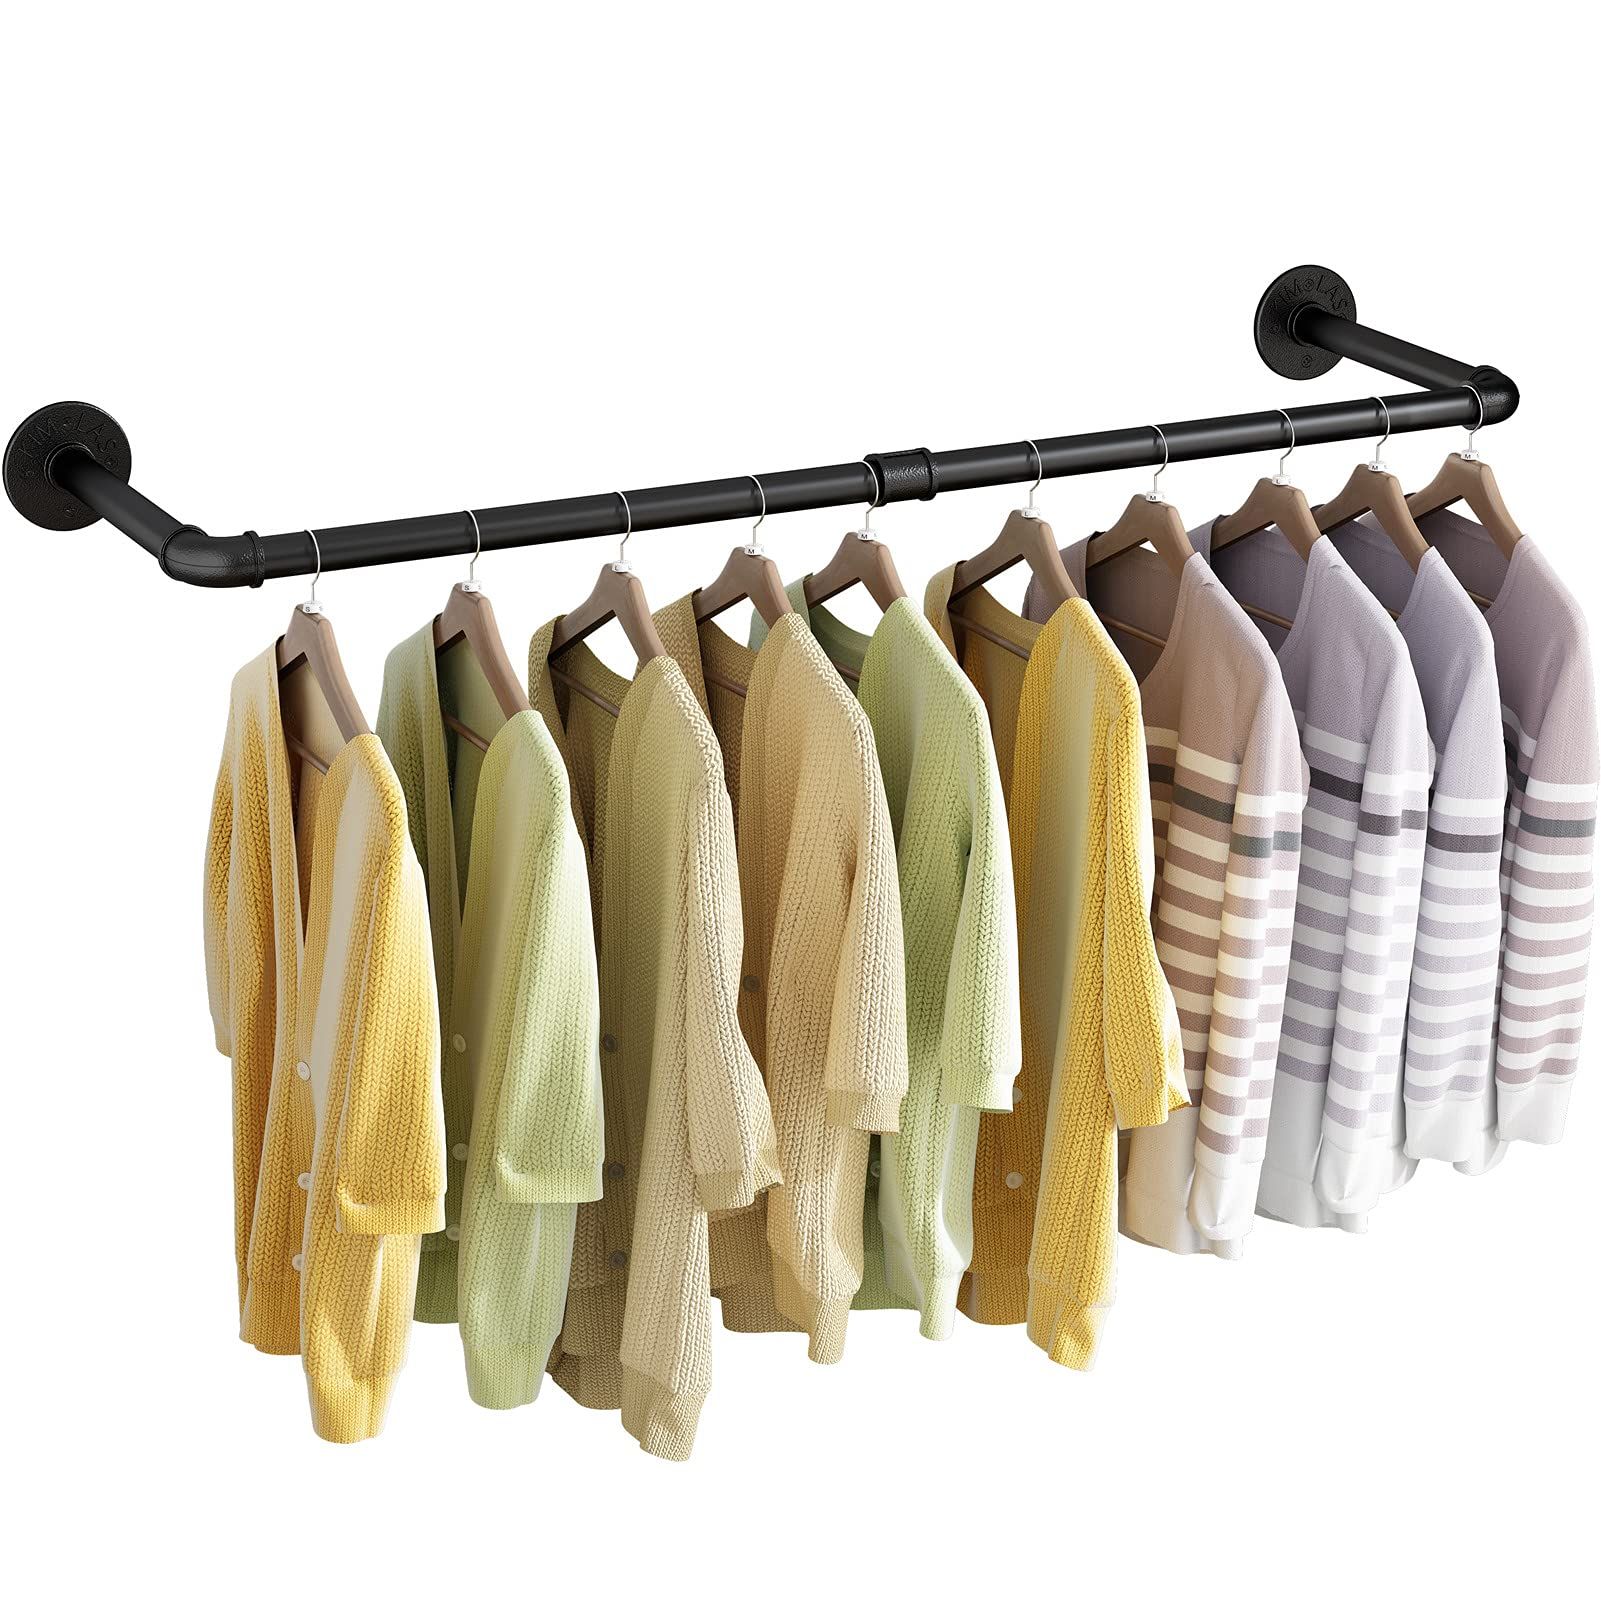 UlSpeed Clothes rack, 38.4in Wall Mounted Industrial Pipe Clothing Rack, Garment Rack Space Saver Ha | Amazon (US)